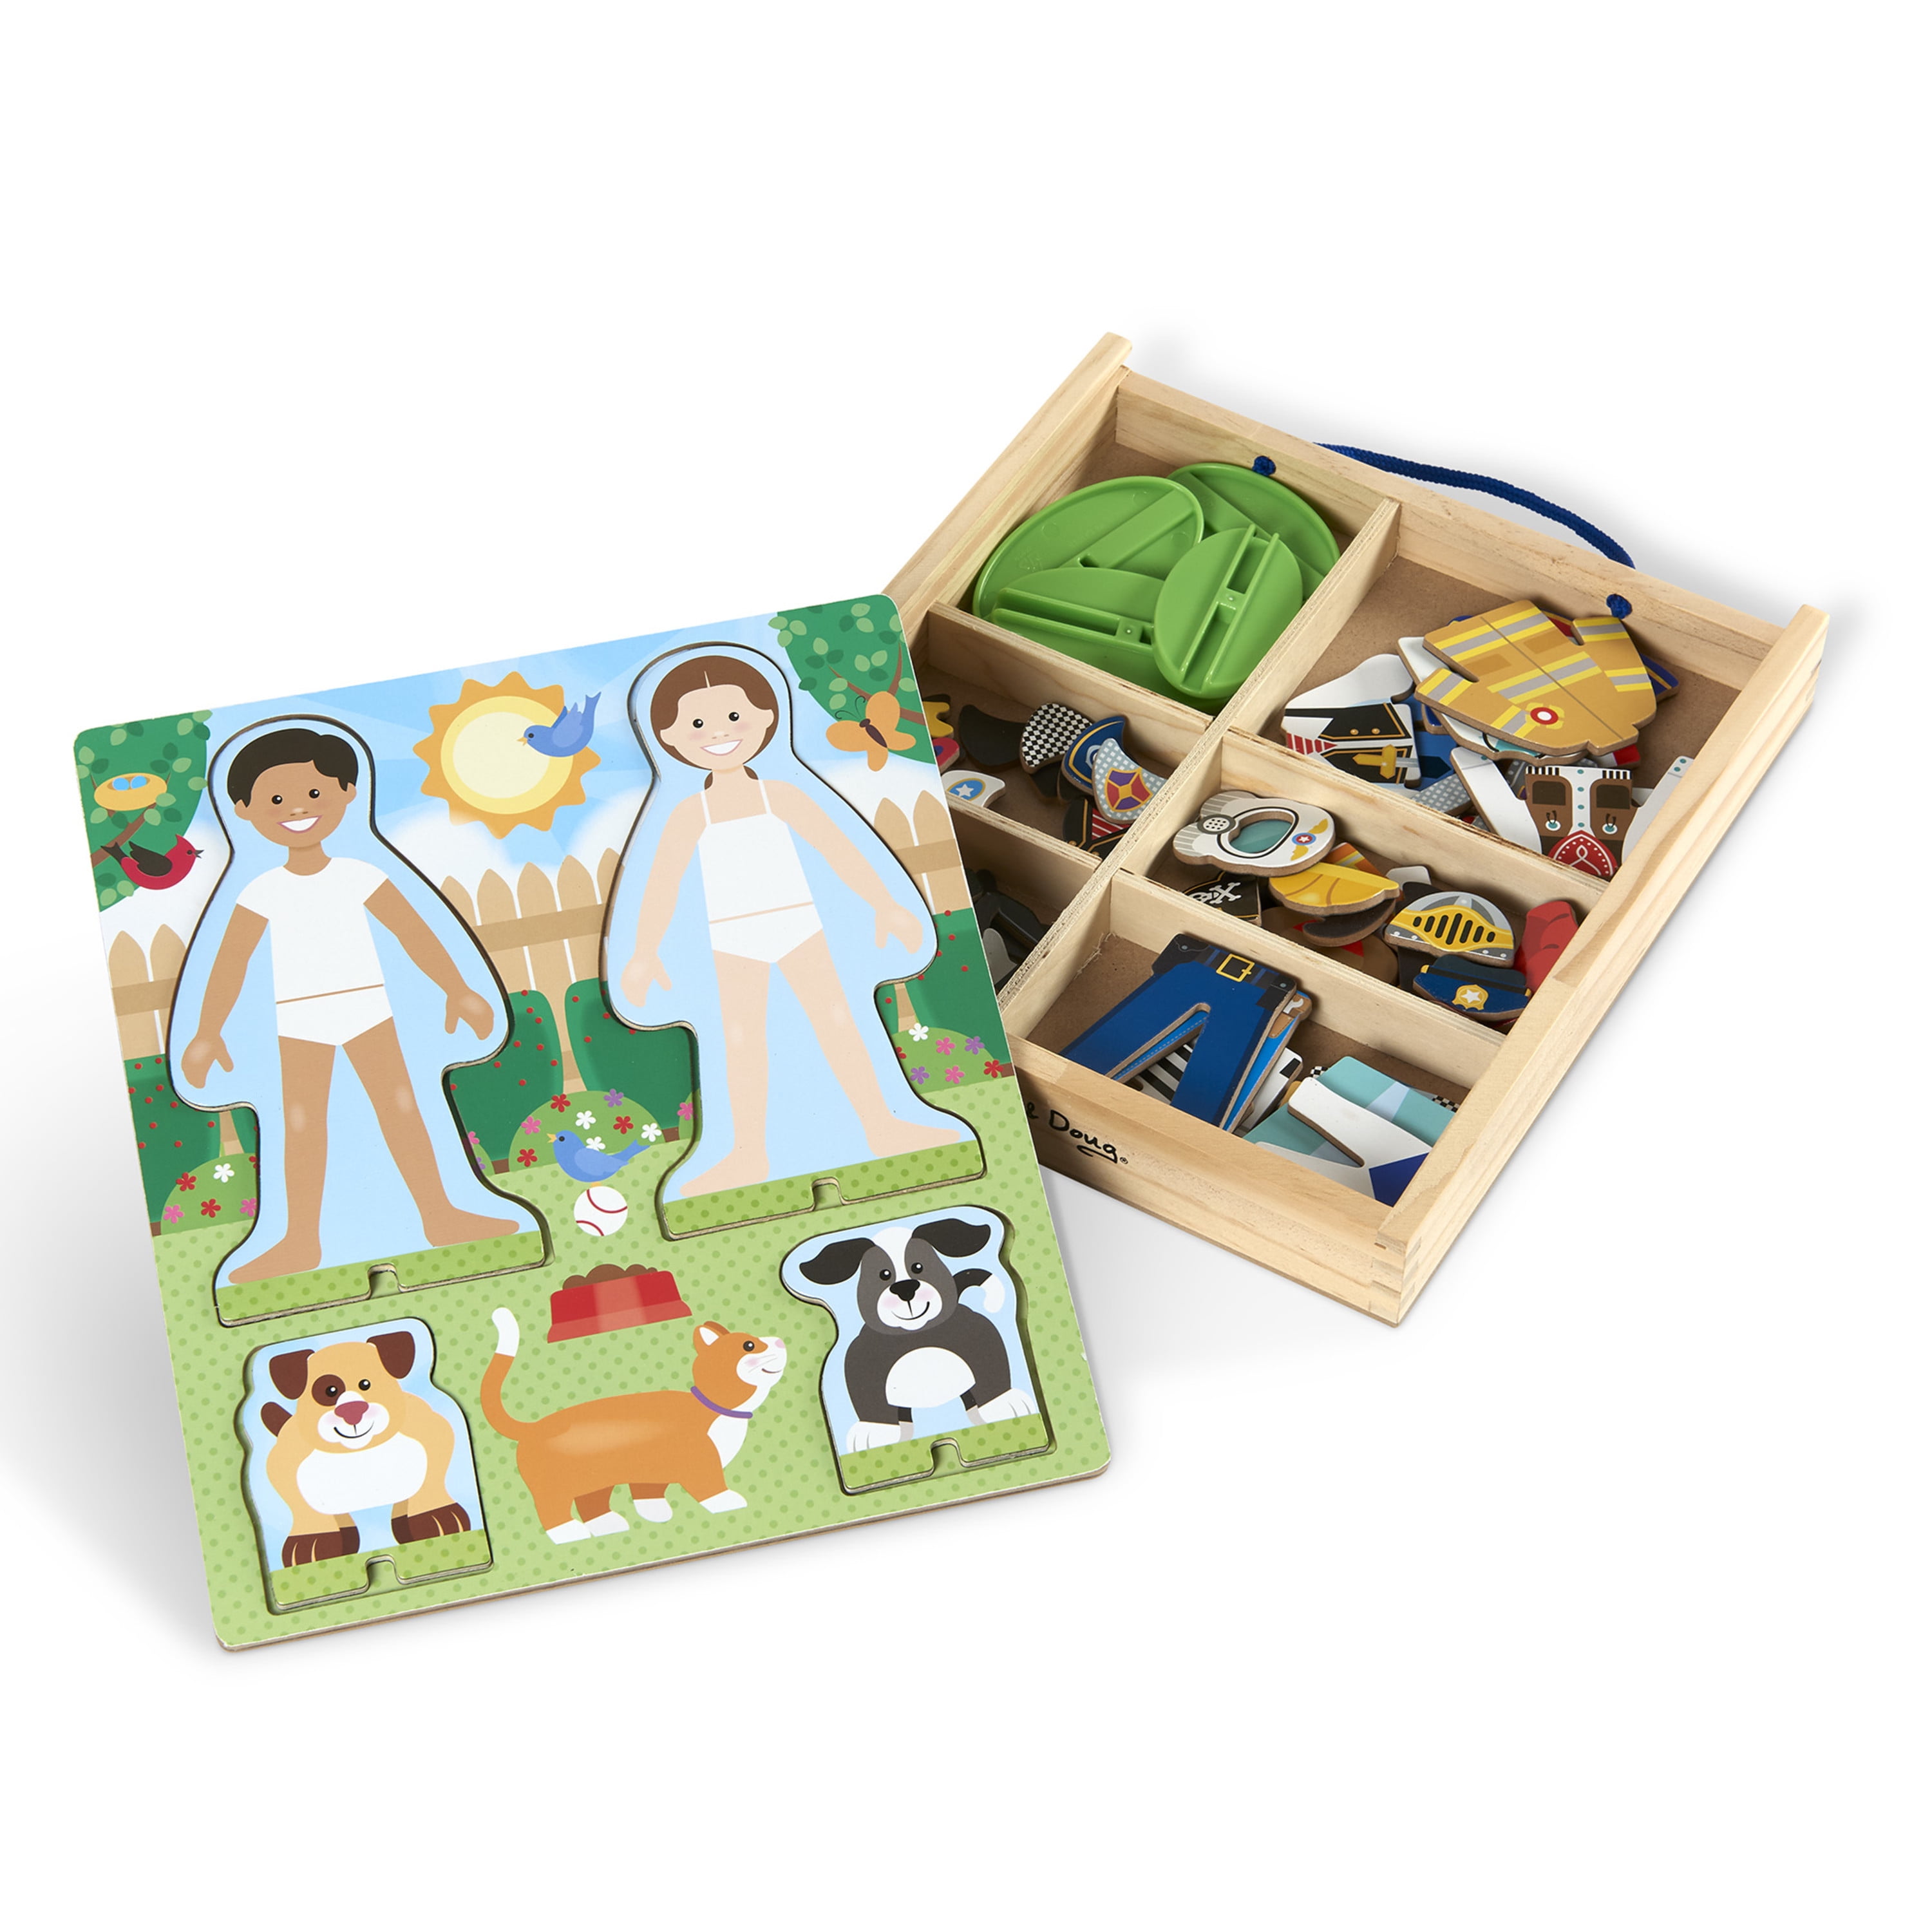 TOYSTER'S Magnetic Wooden Dress-Up Dolls Toy